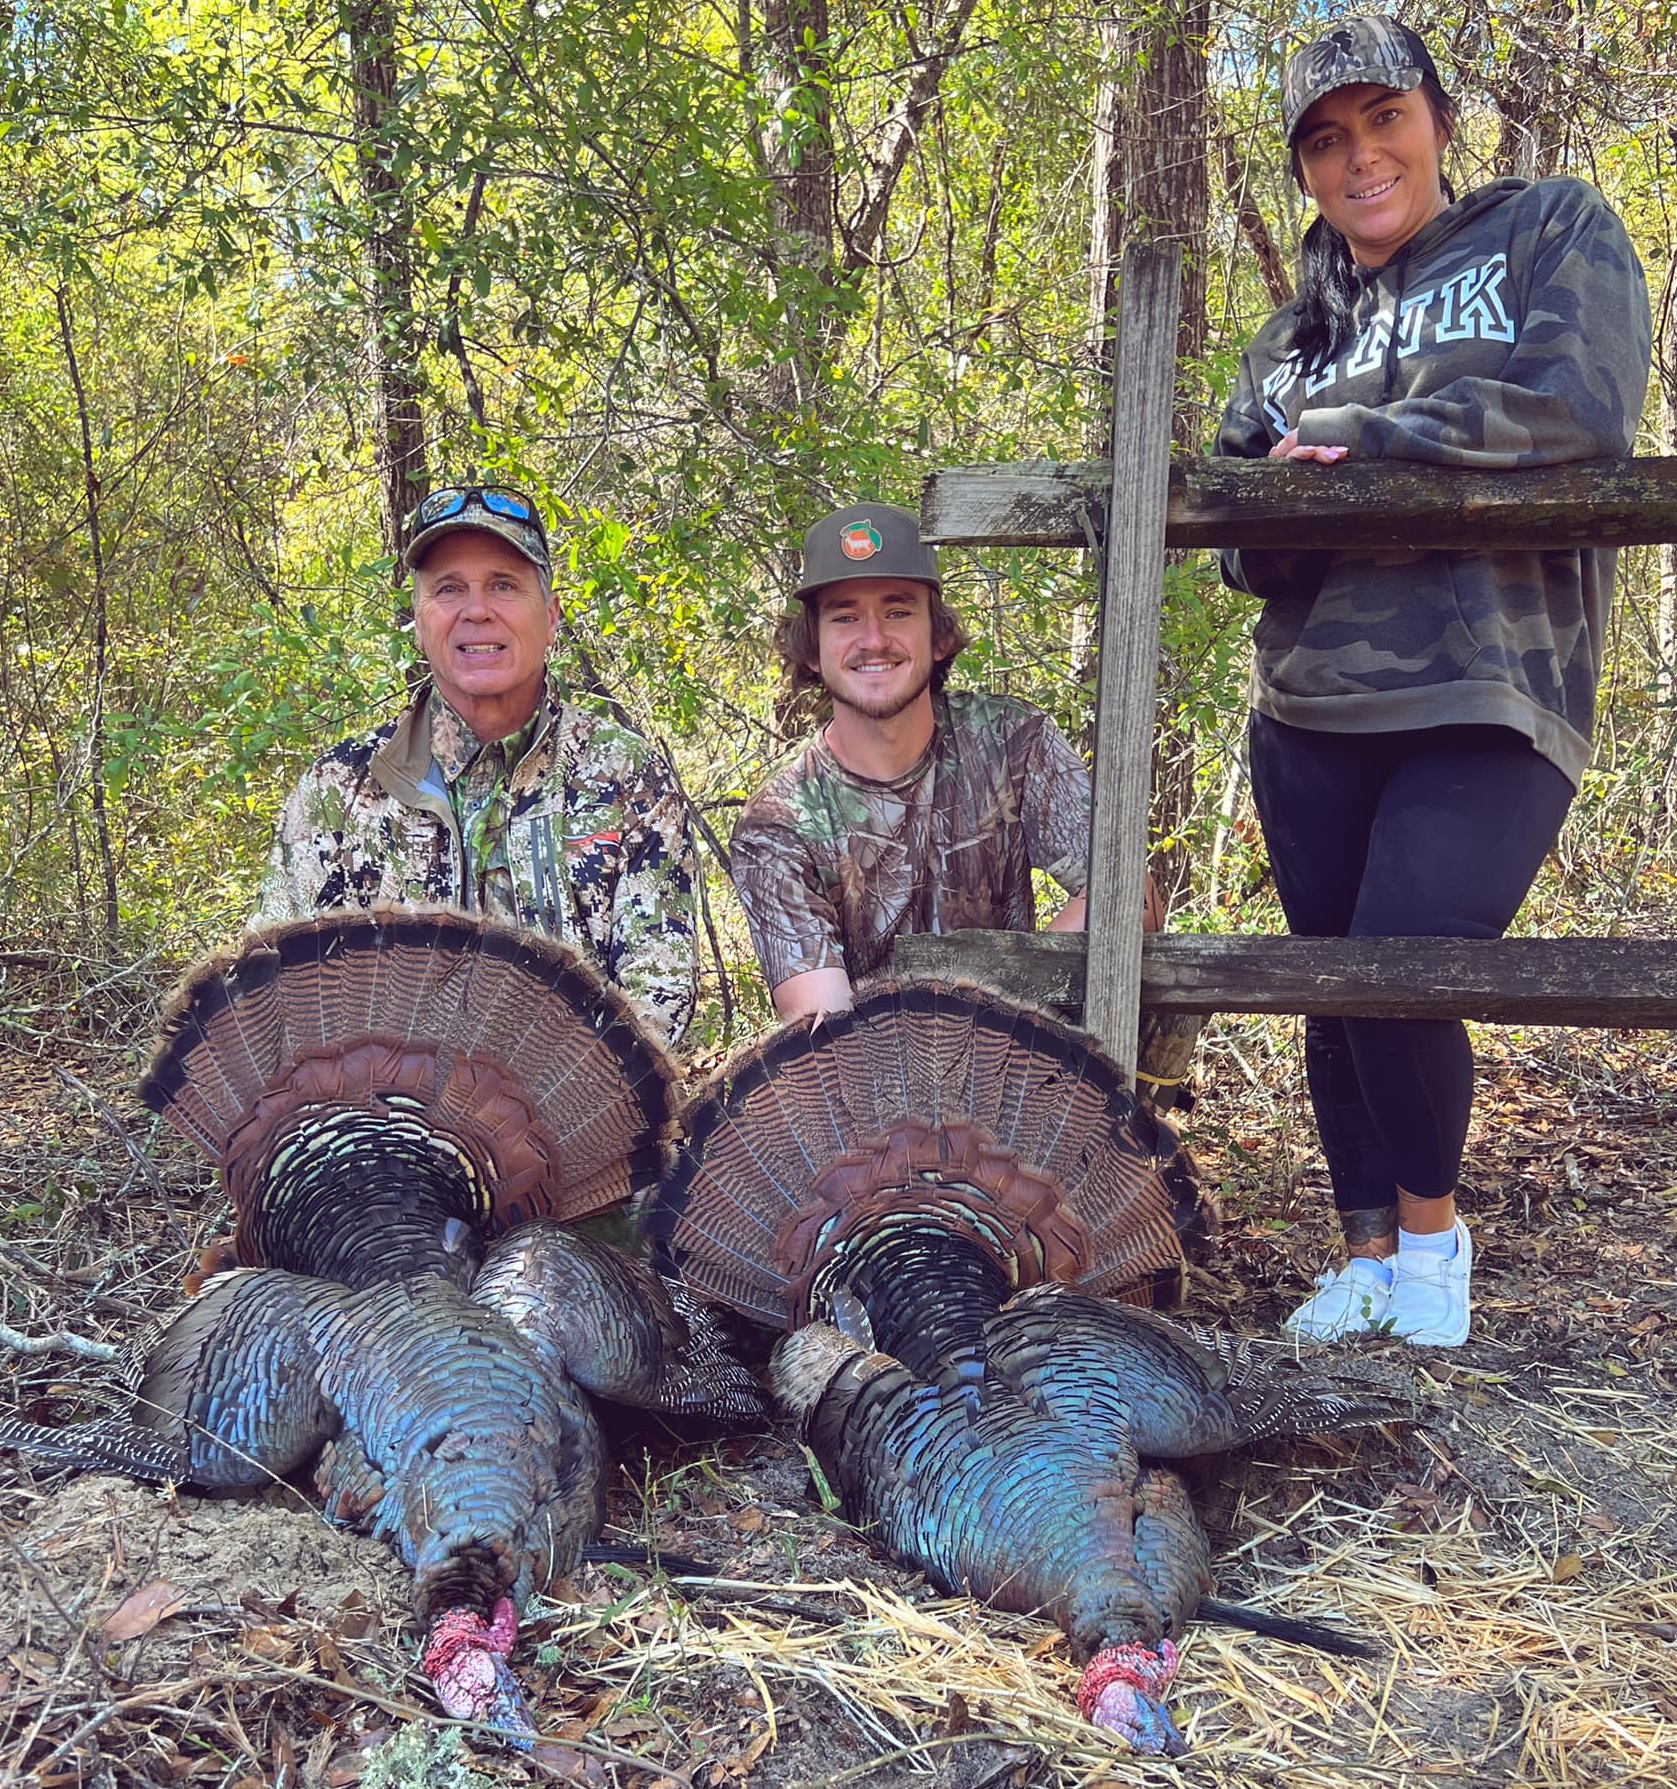  2 Day/3 Night Kentucky Turkey Hunt for 2 with Triple Crown Outfitters valued at $3000.